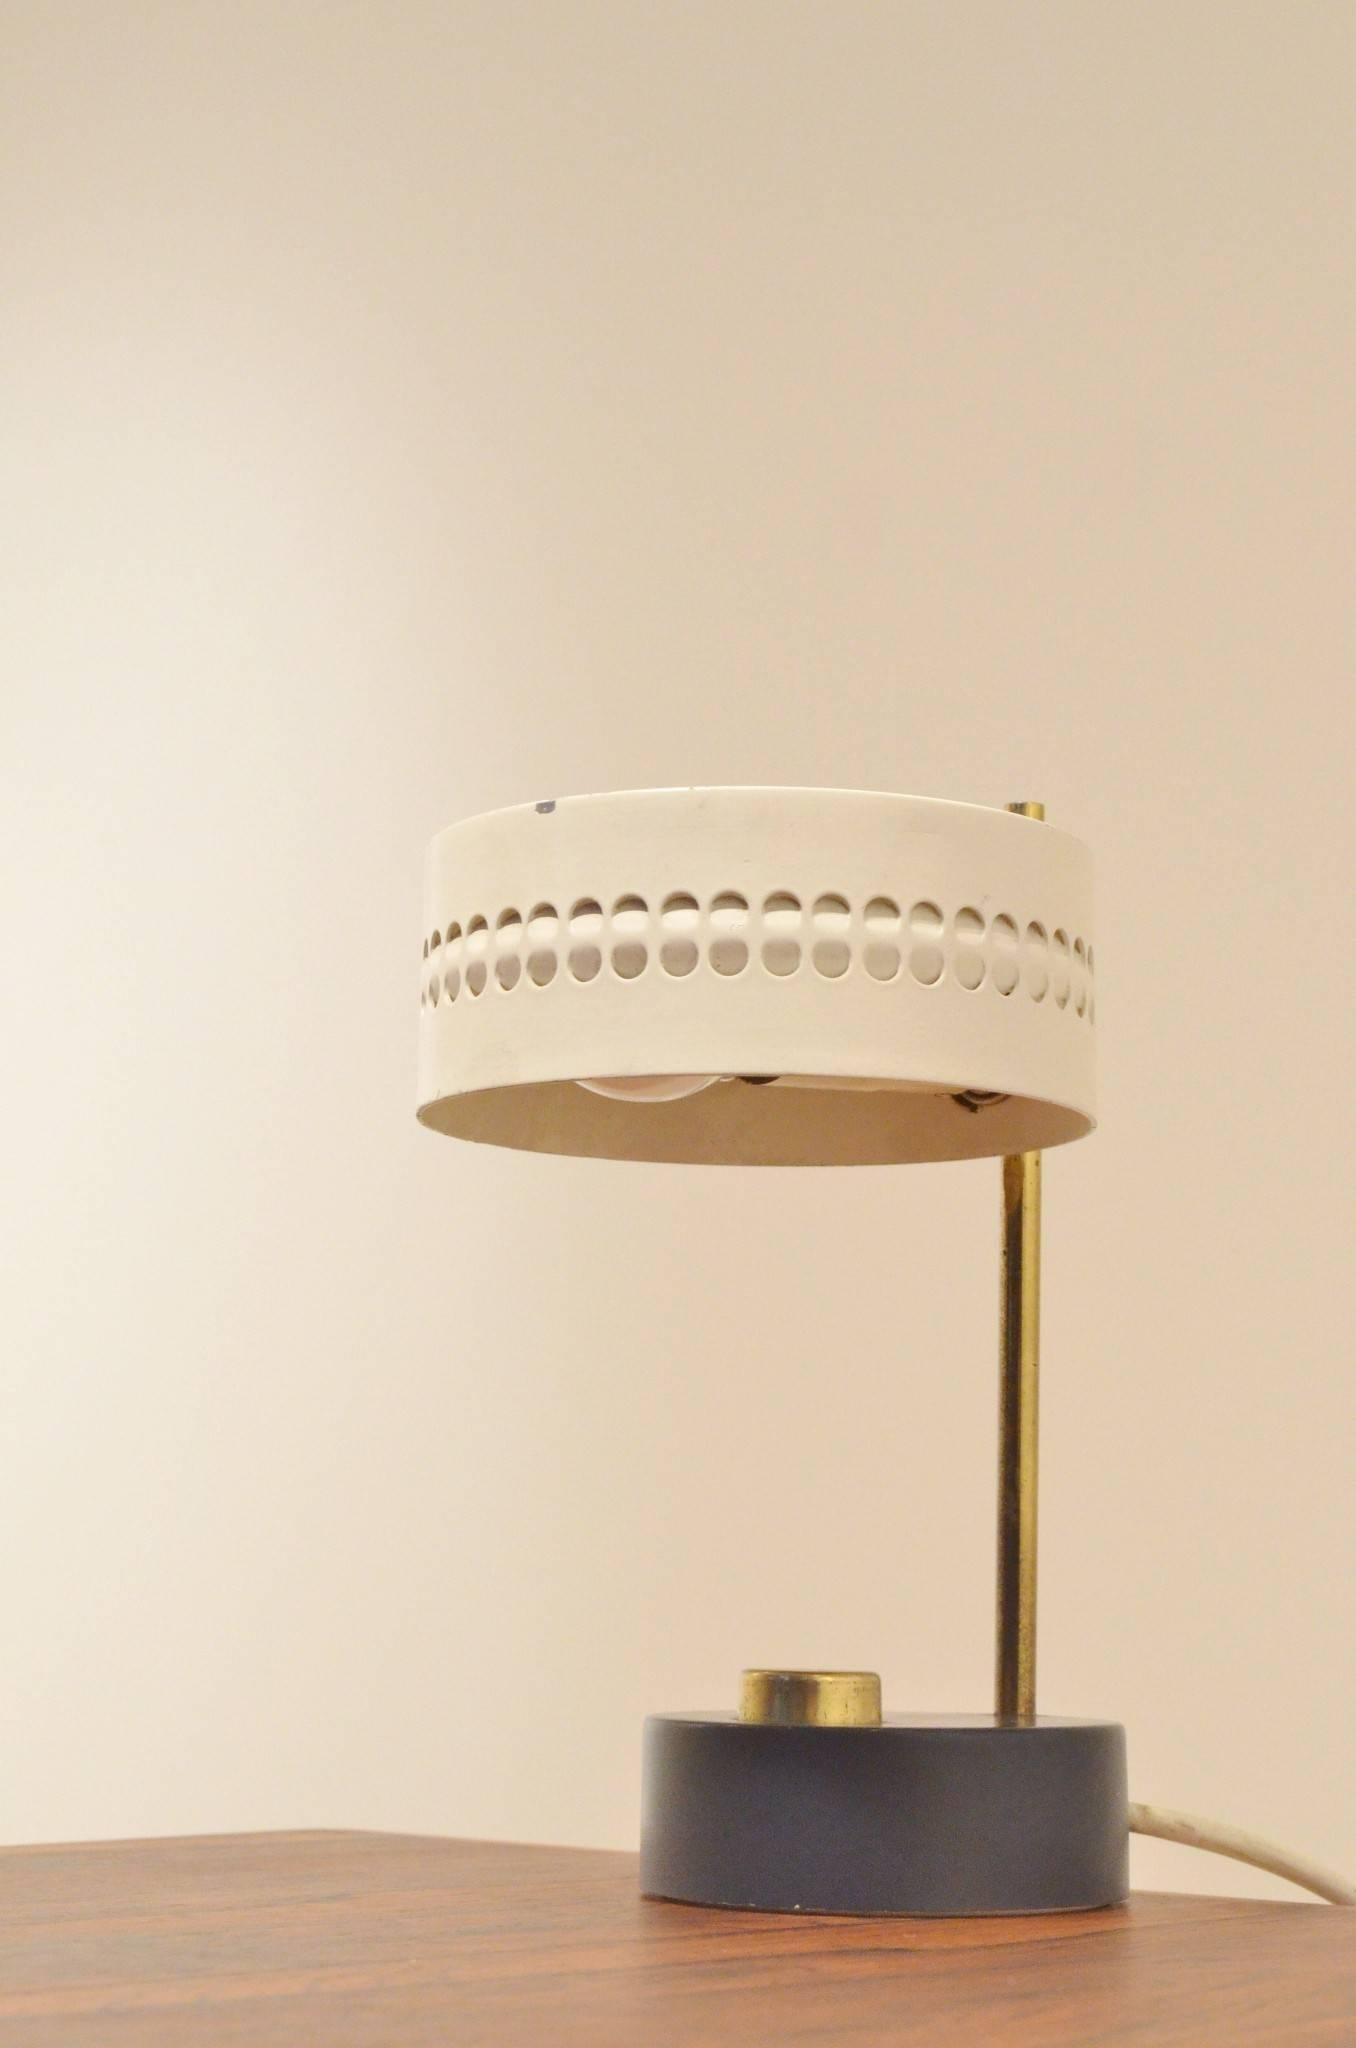 Small table lamp attributed to Mathieu Mategot with perforated white/grey painted metal, the stand and switch are made in brass and the base is in black painted metal.
    